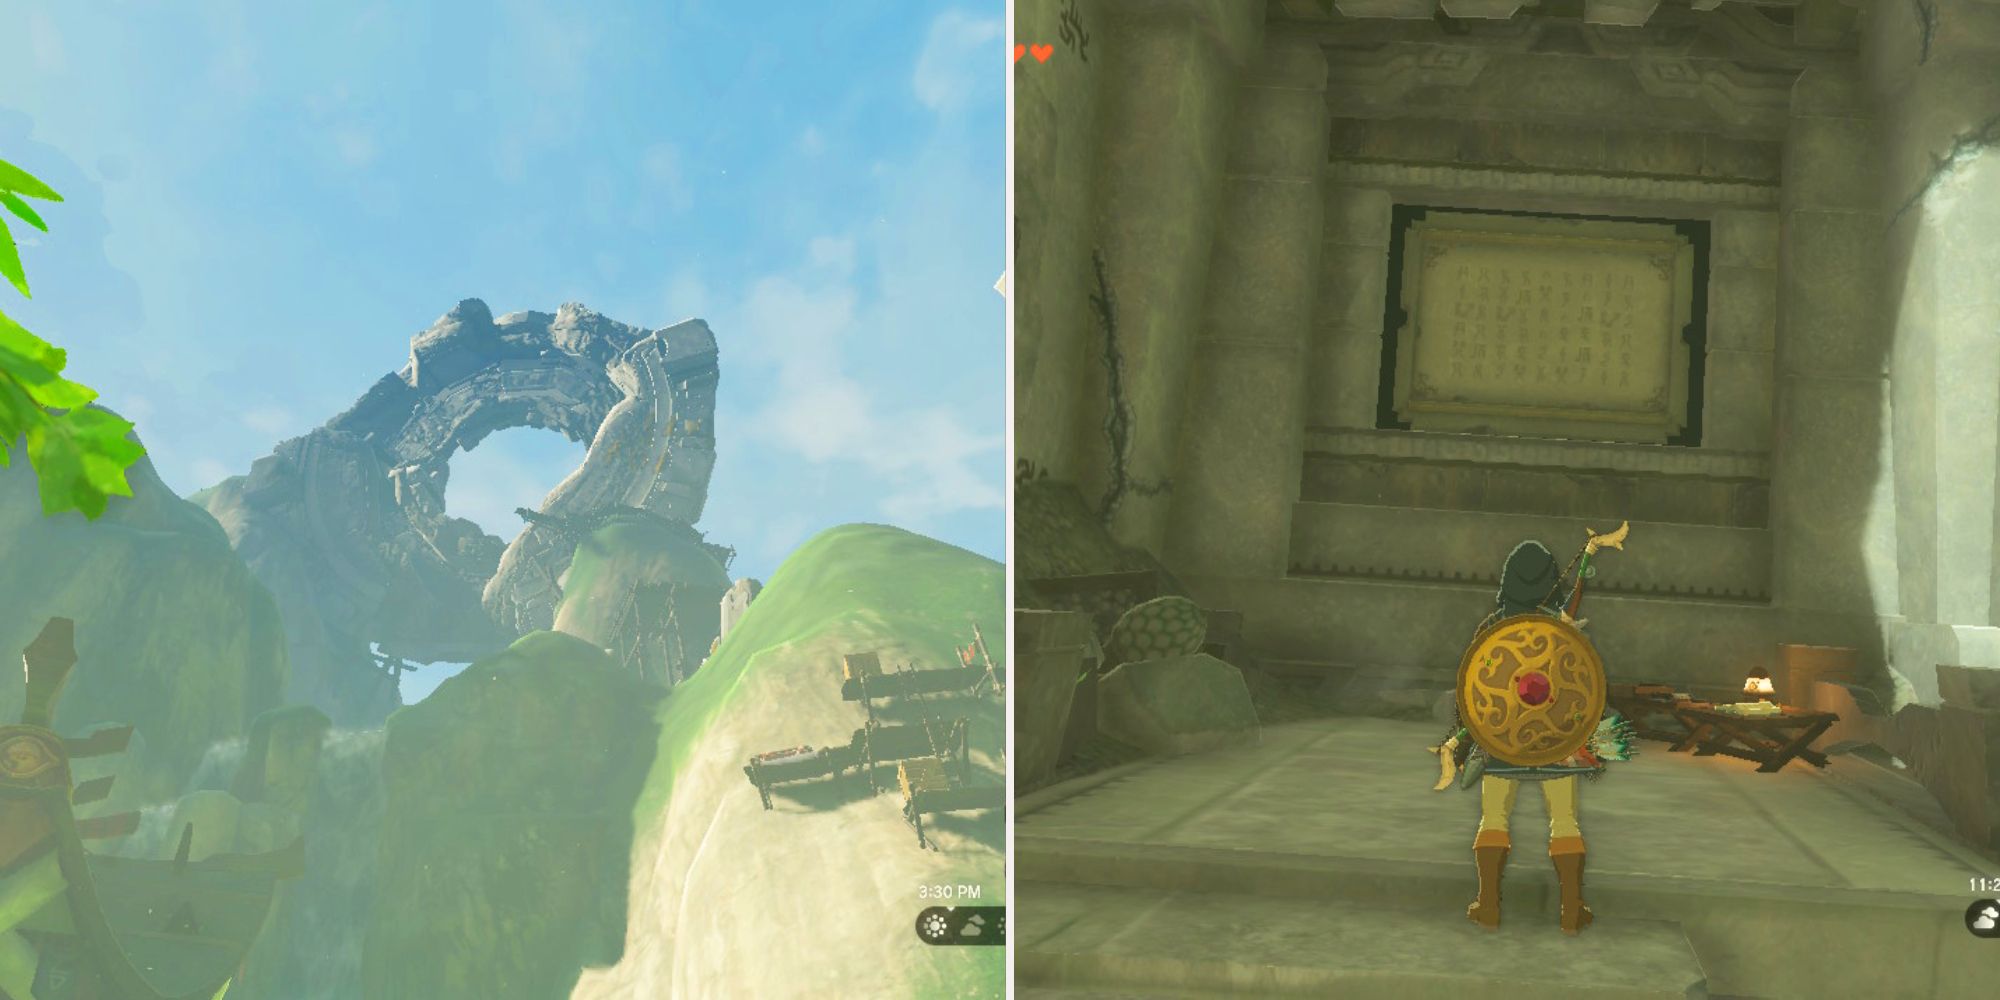 Ancient ring-like ruins have fallen around a village, and Link looks on.